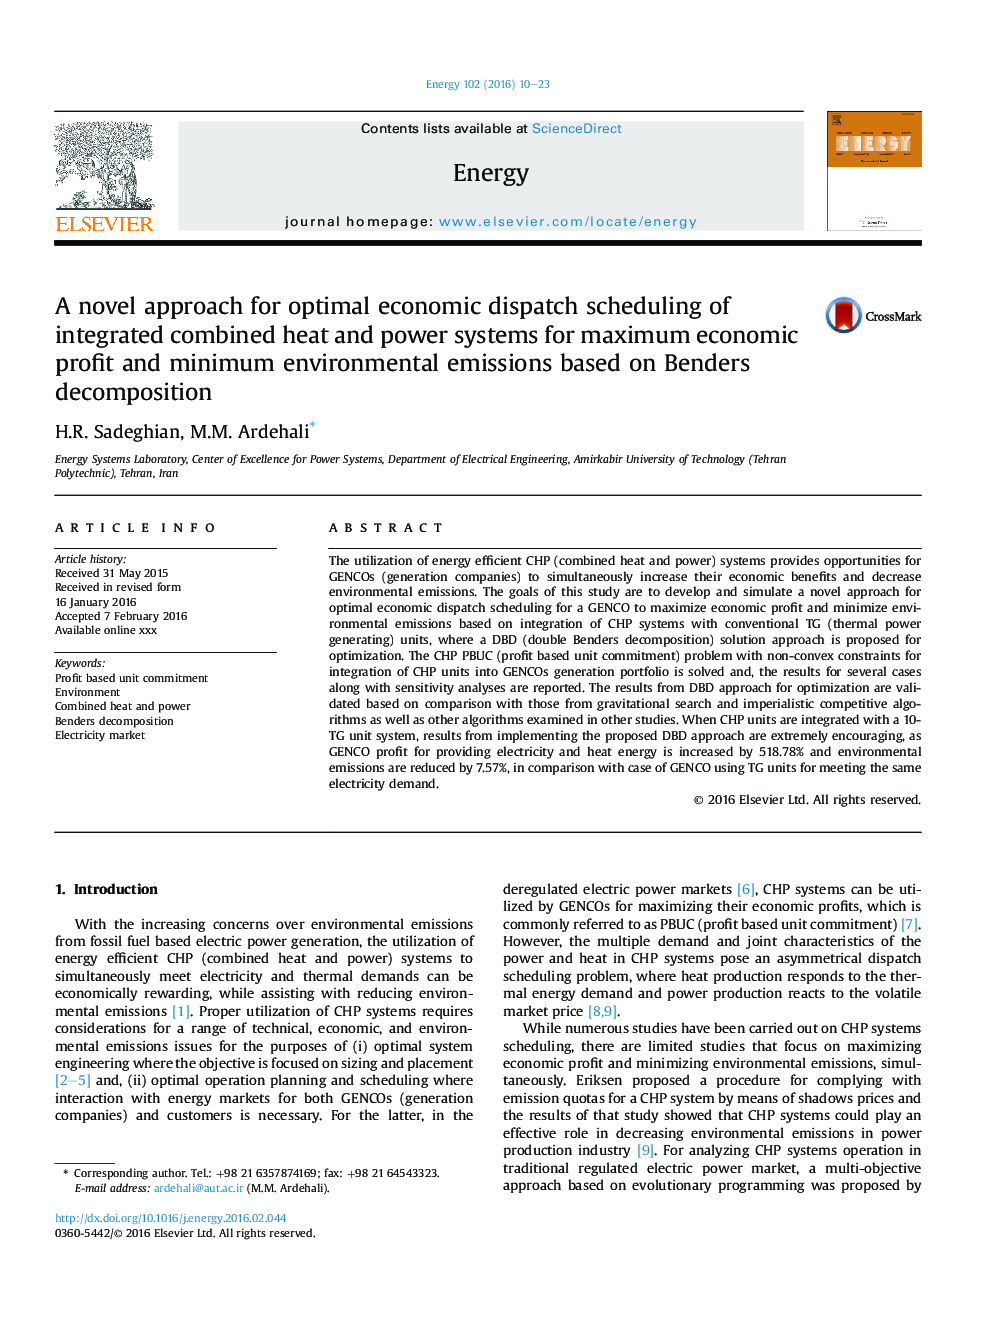 A novel approach for optimal economic dispatch scheduling of integrated combined heat and power systems for maximum economic profit and minimum environmental emissions based on Benders decomposition